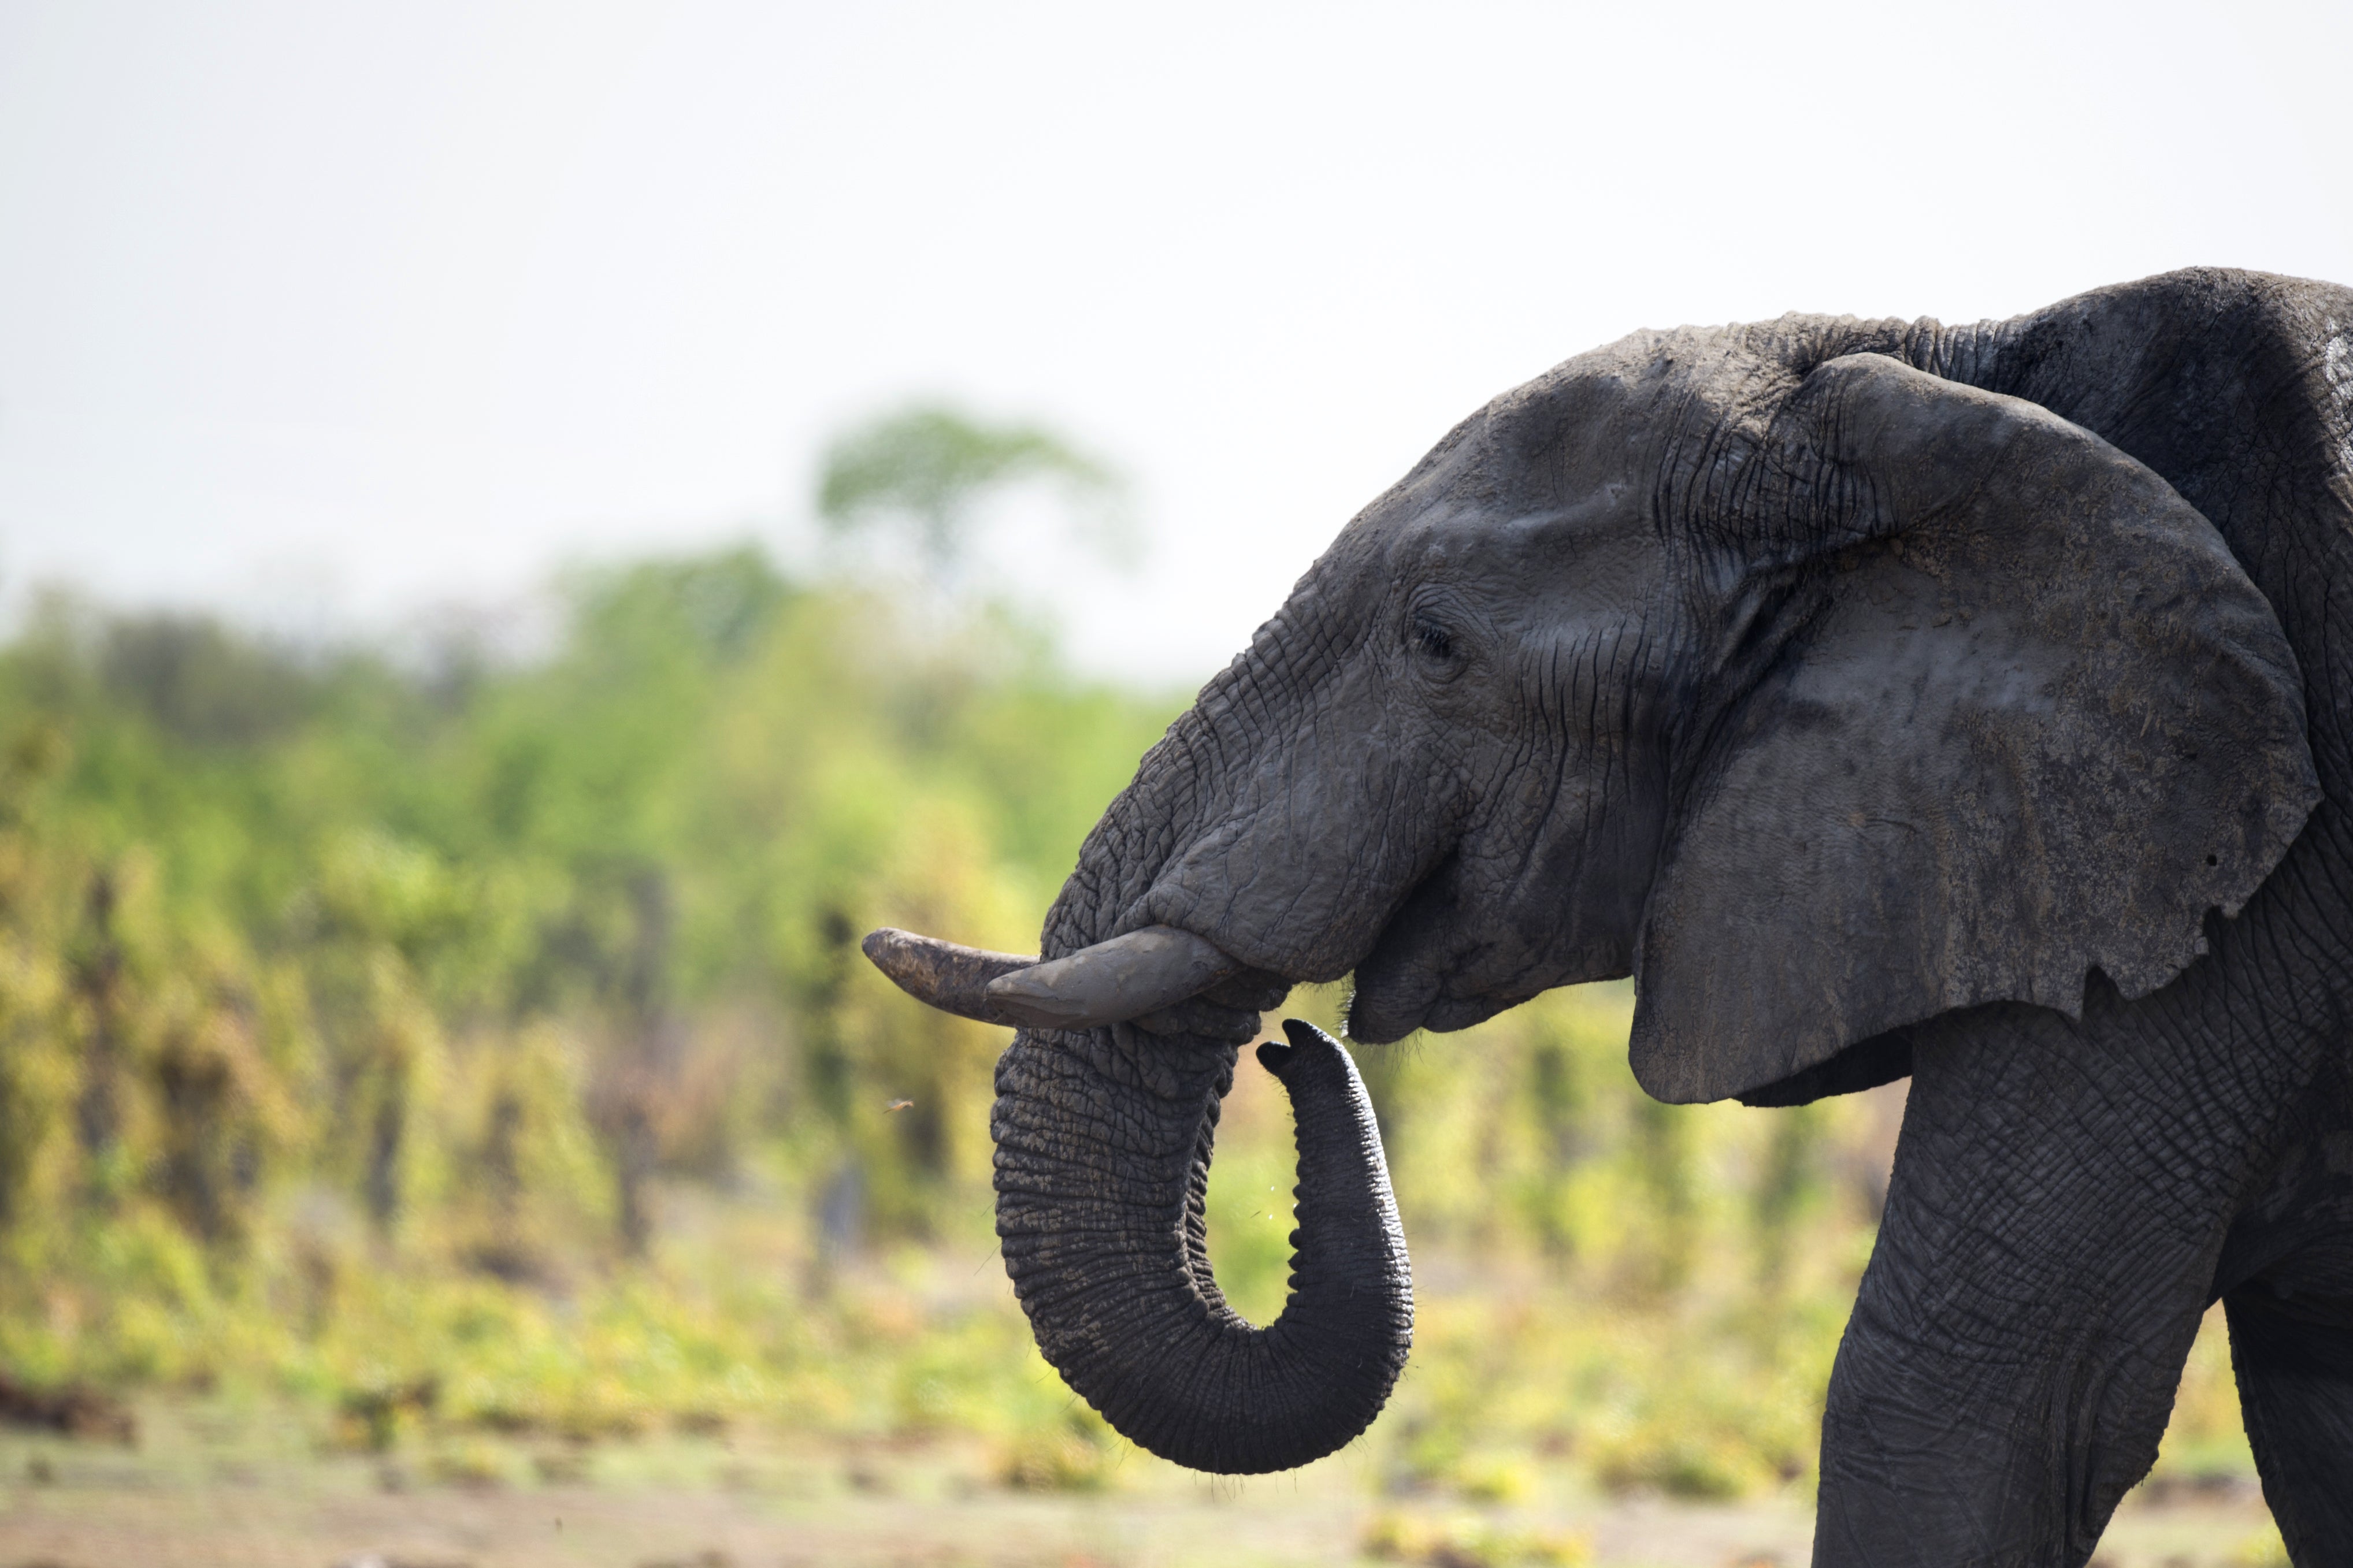 African elephants are at increasing risk of extinction, experts warn